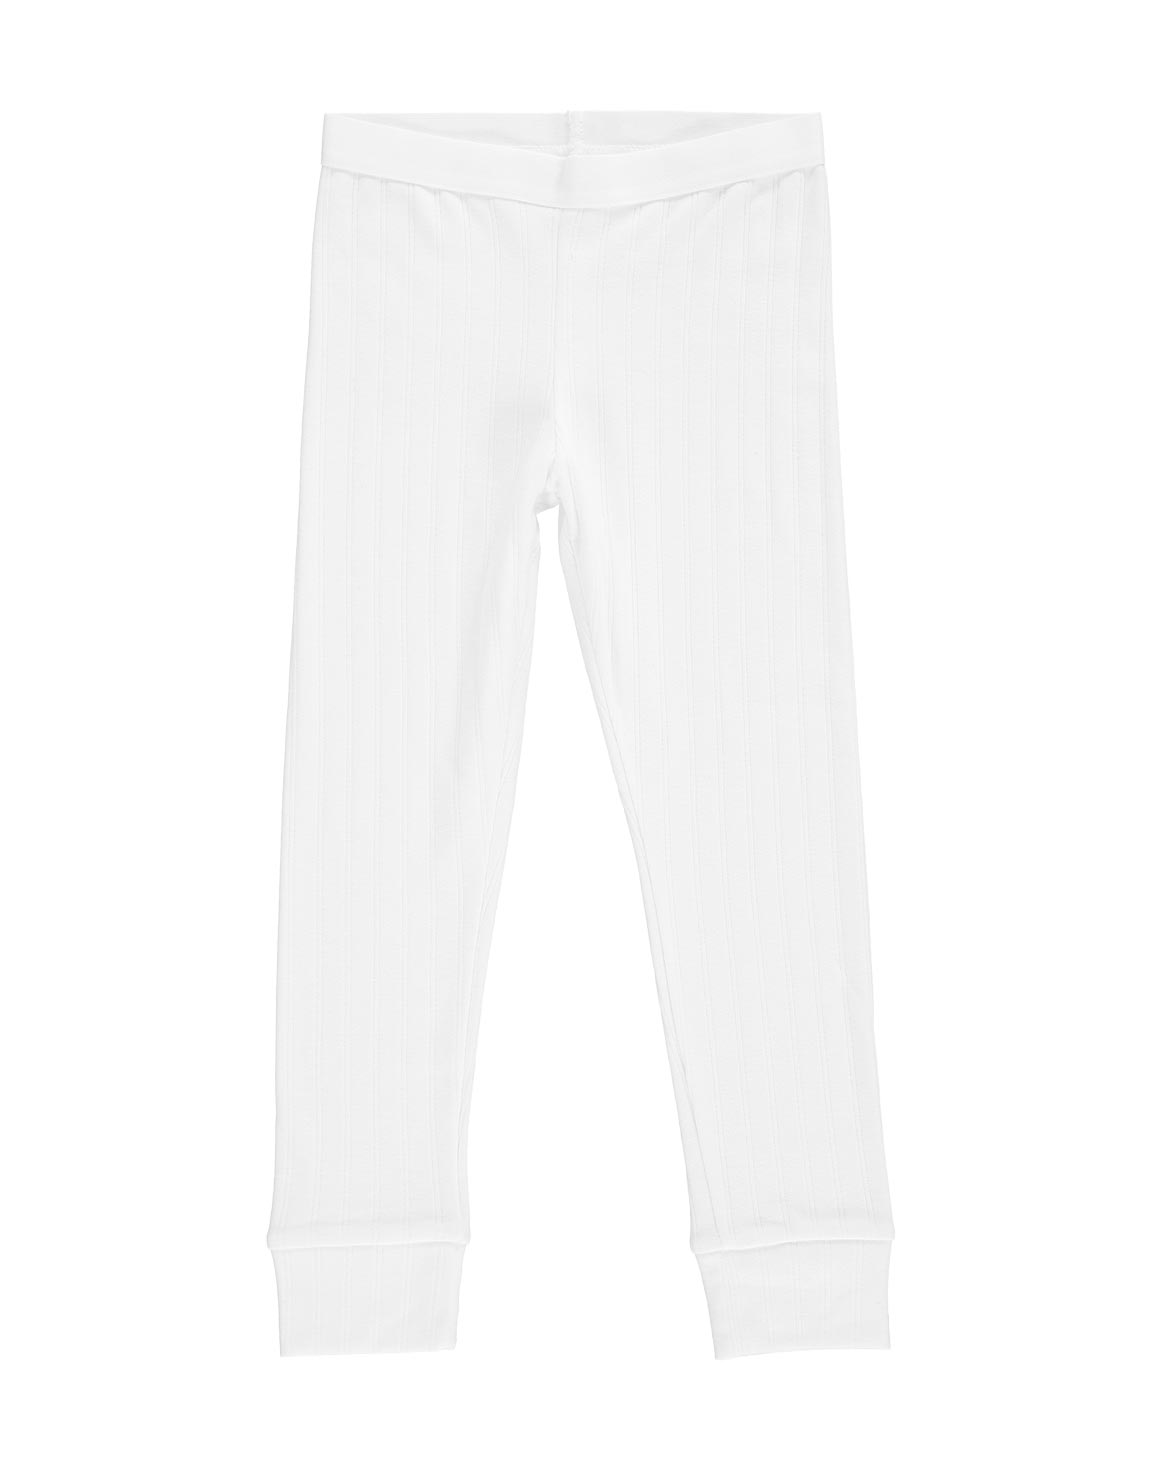 TESCO THERMAL LONG JOHNS WHITE SIZE XL OR WAIST 102-107cm OR 40-42” £4.00 -  PicClick UK